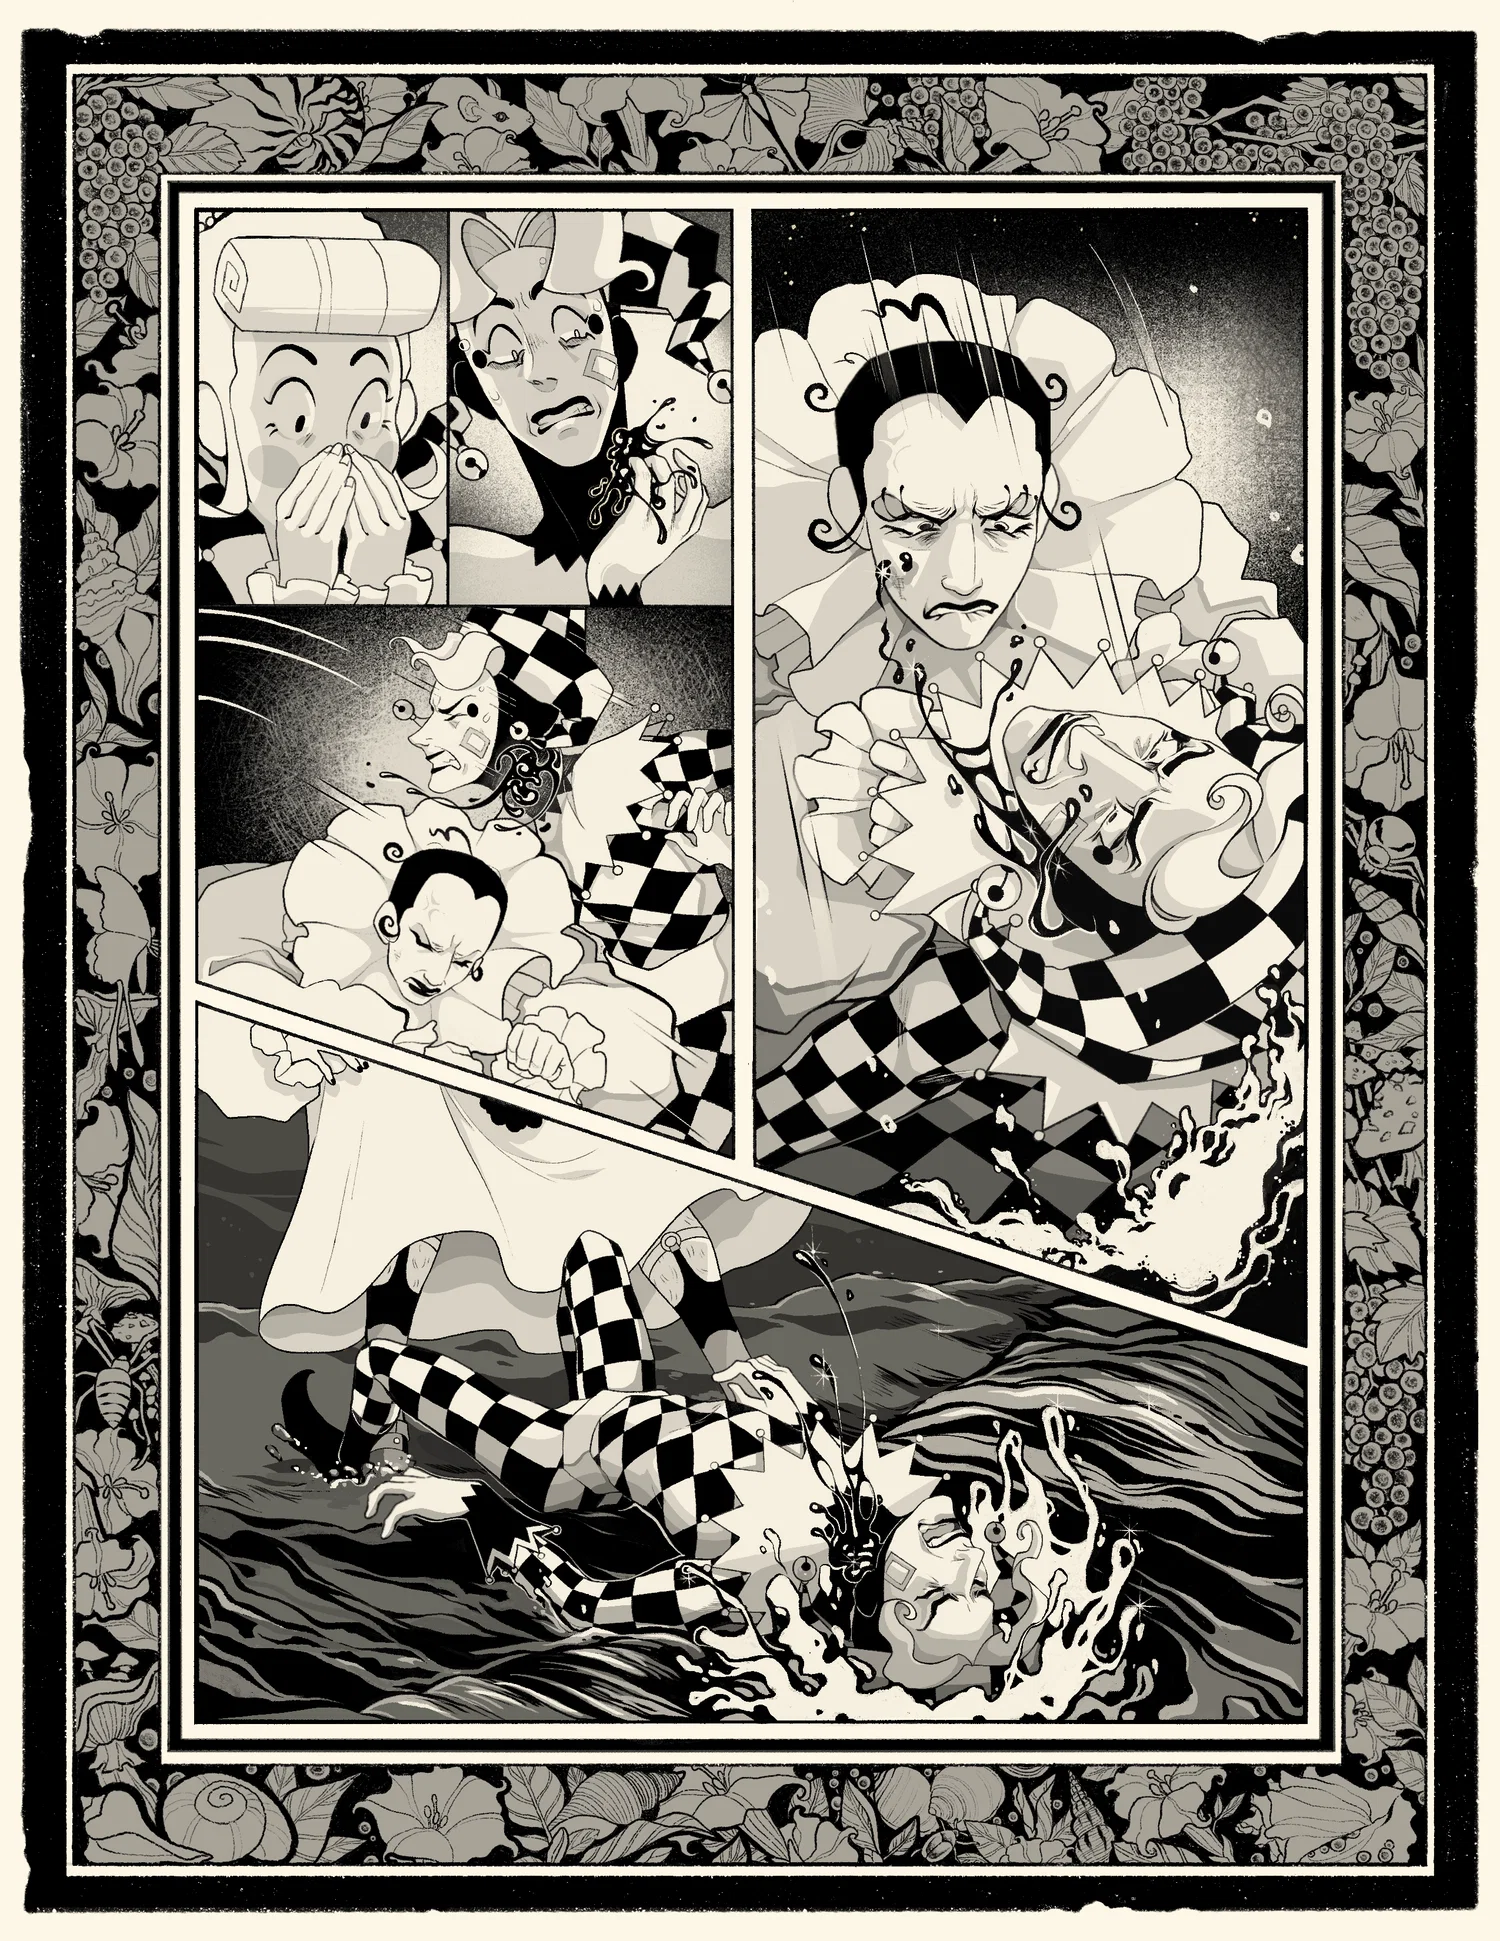 Pages of a black and white comic about circus performers. They show action between the characters, fighting and kissing.